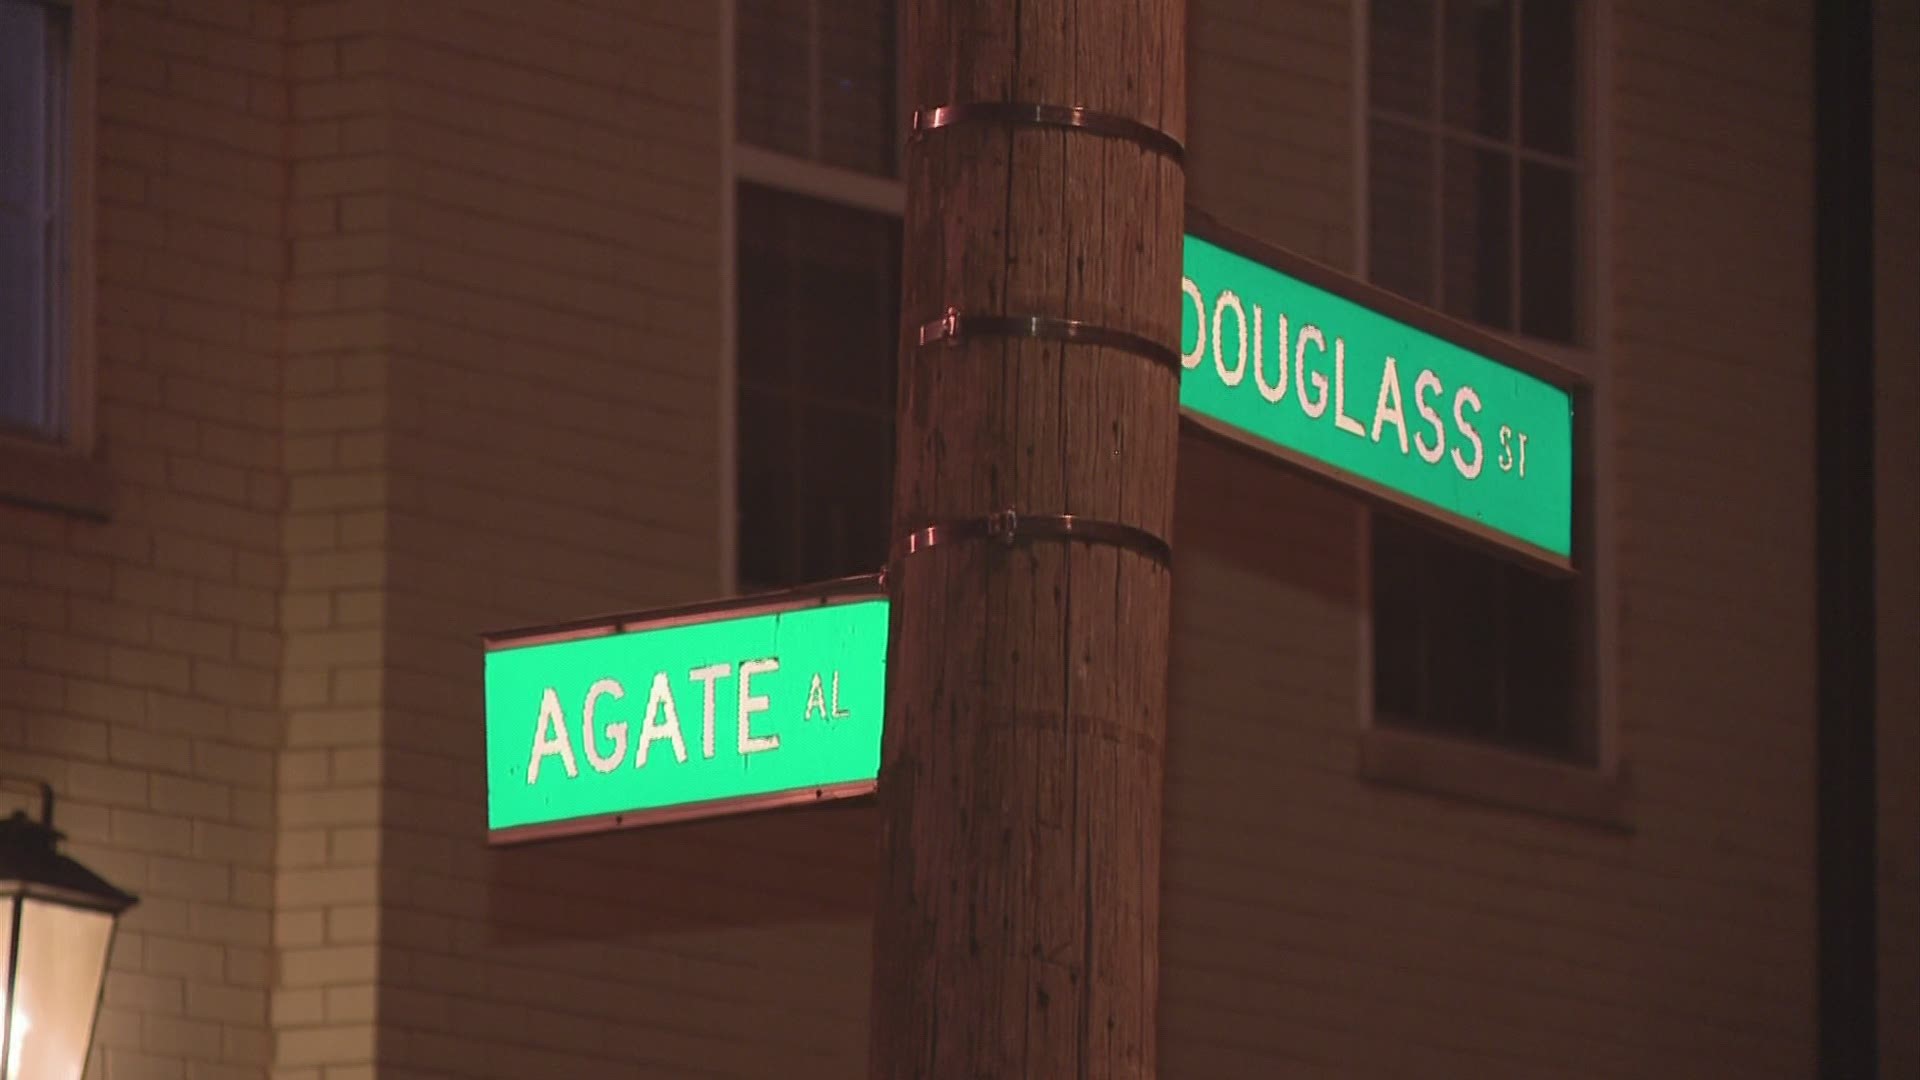 The shooting happened around 9 p.m. in the area of 66 S. Douglass Street.